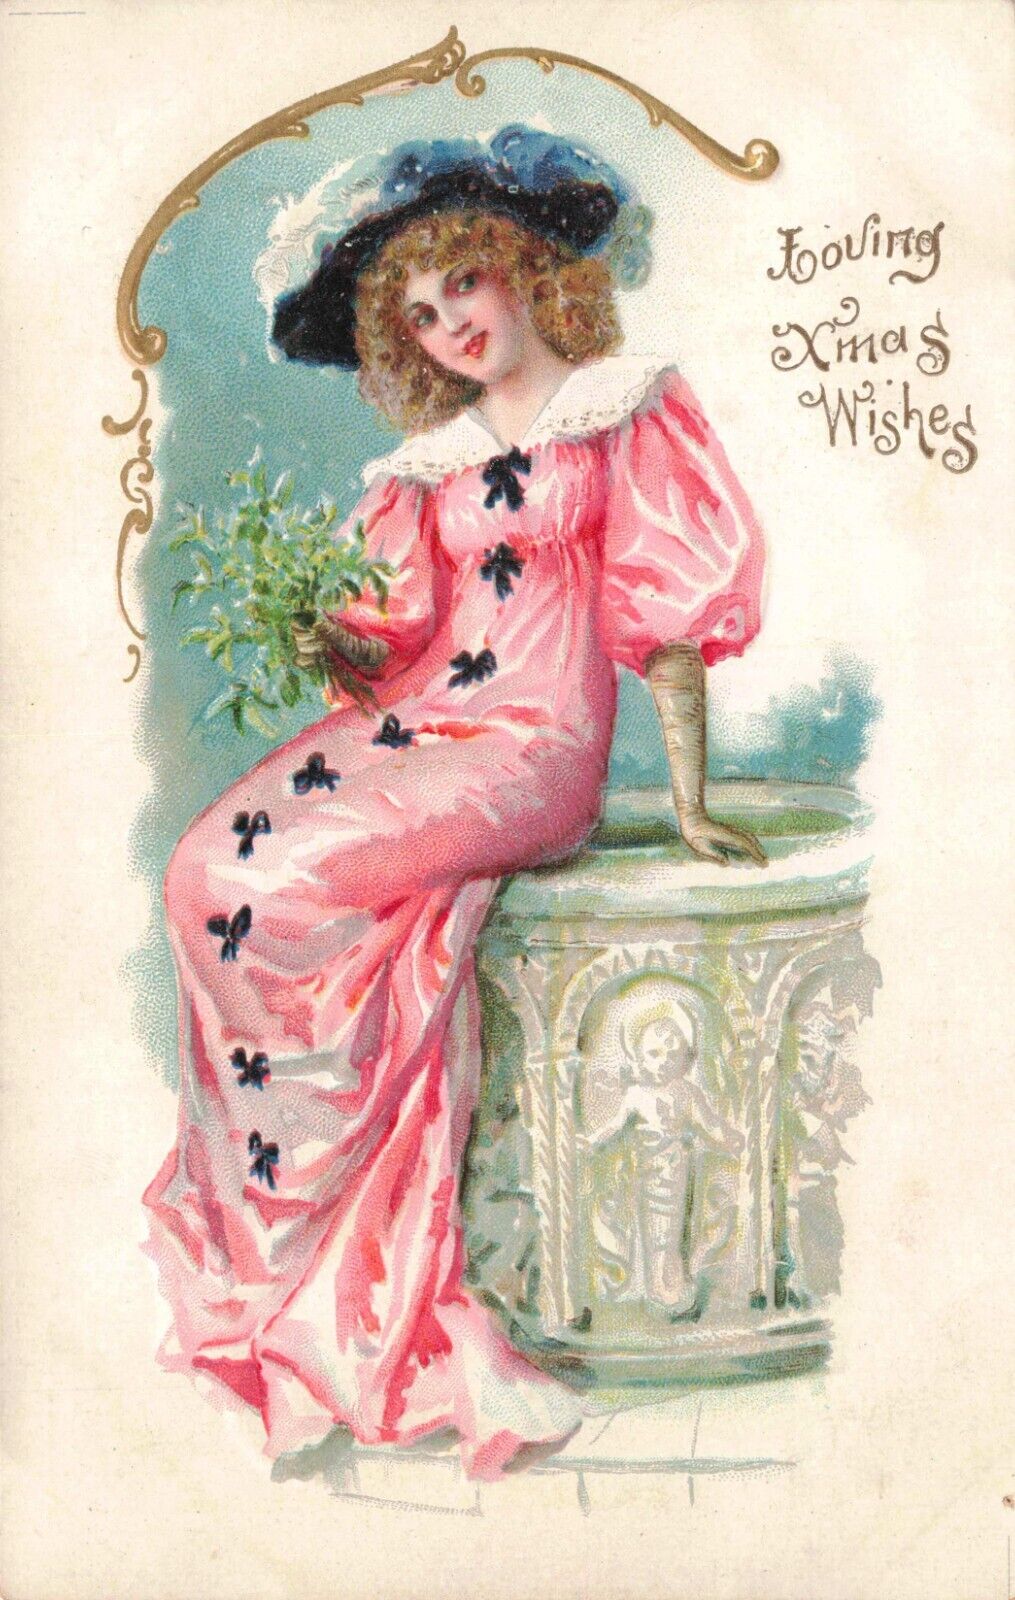 Pretty Lady in Pink Gown & Blue Hat Xmas Wishes Embossed Vintage Postcard